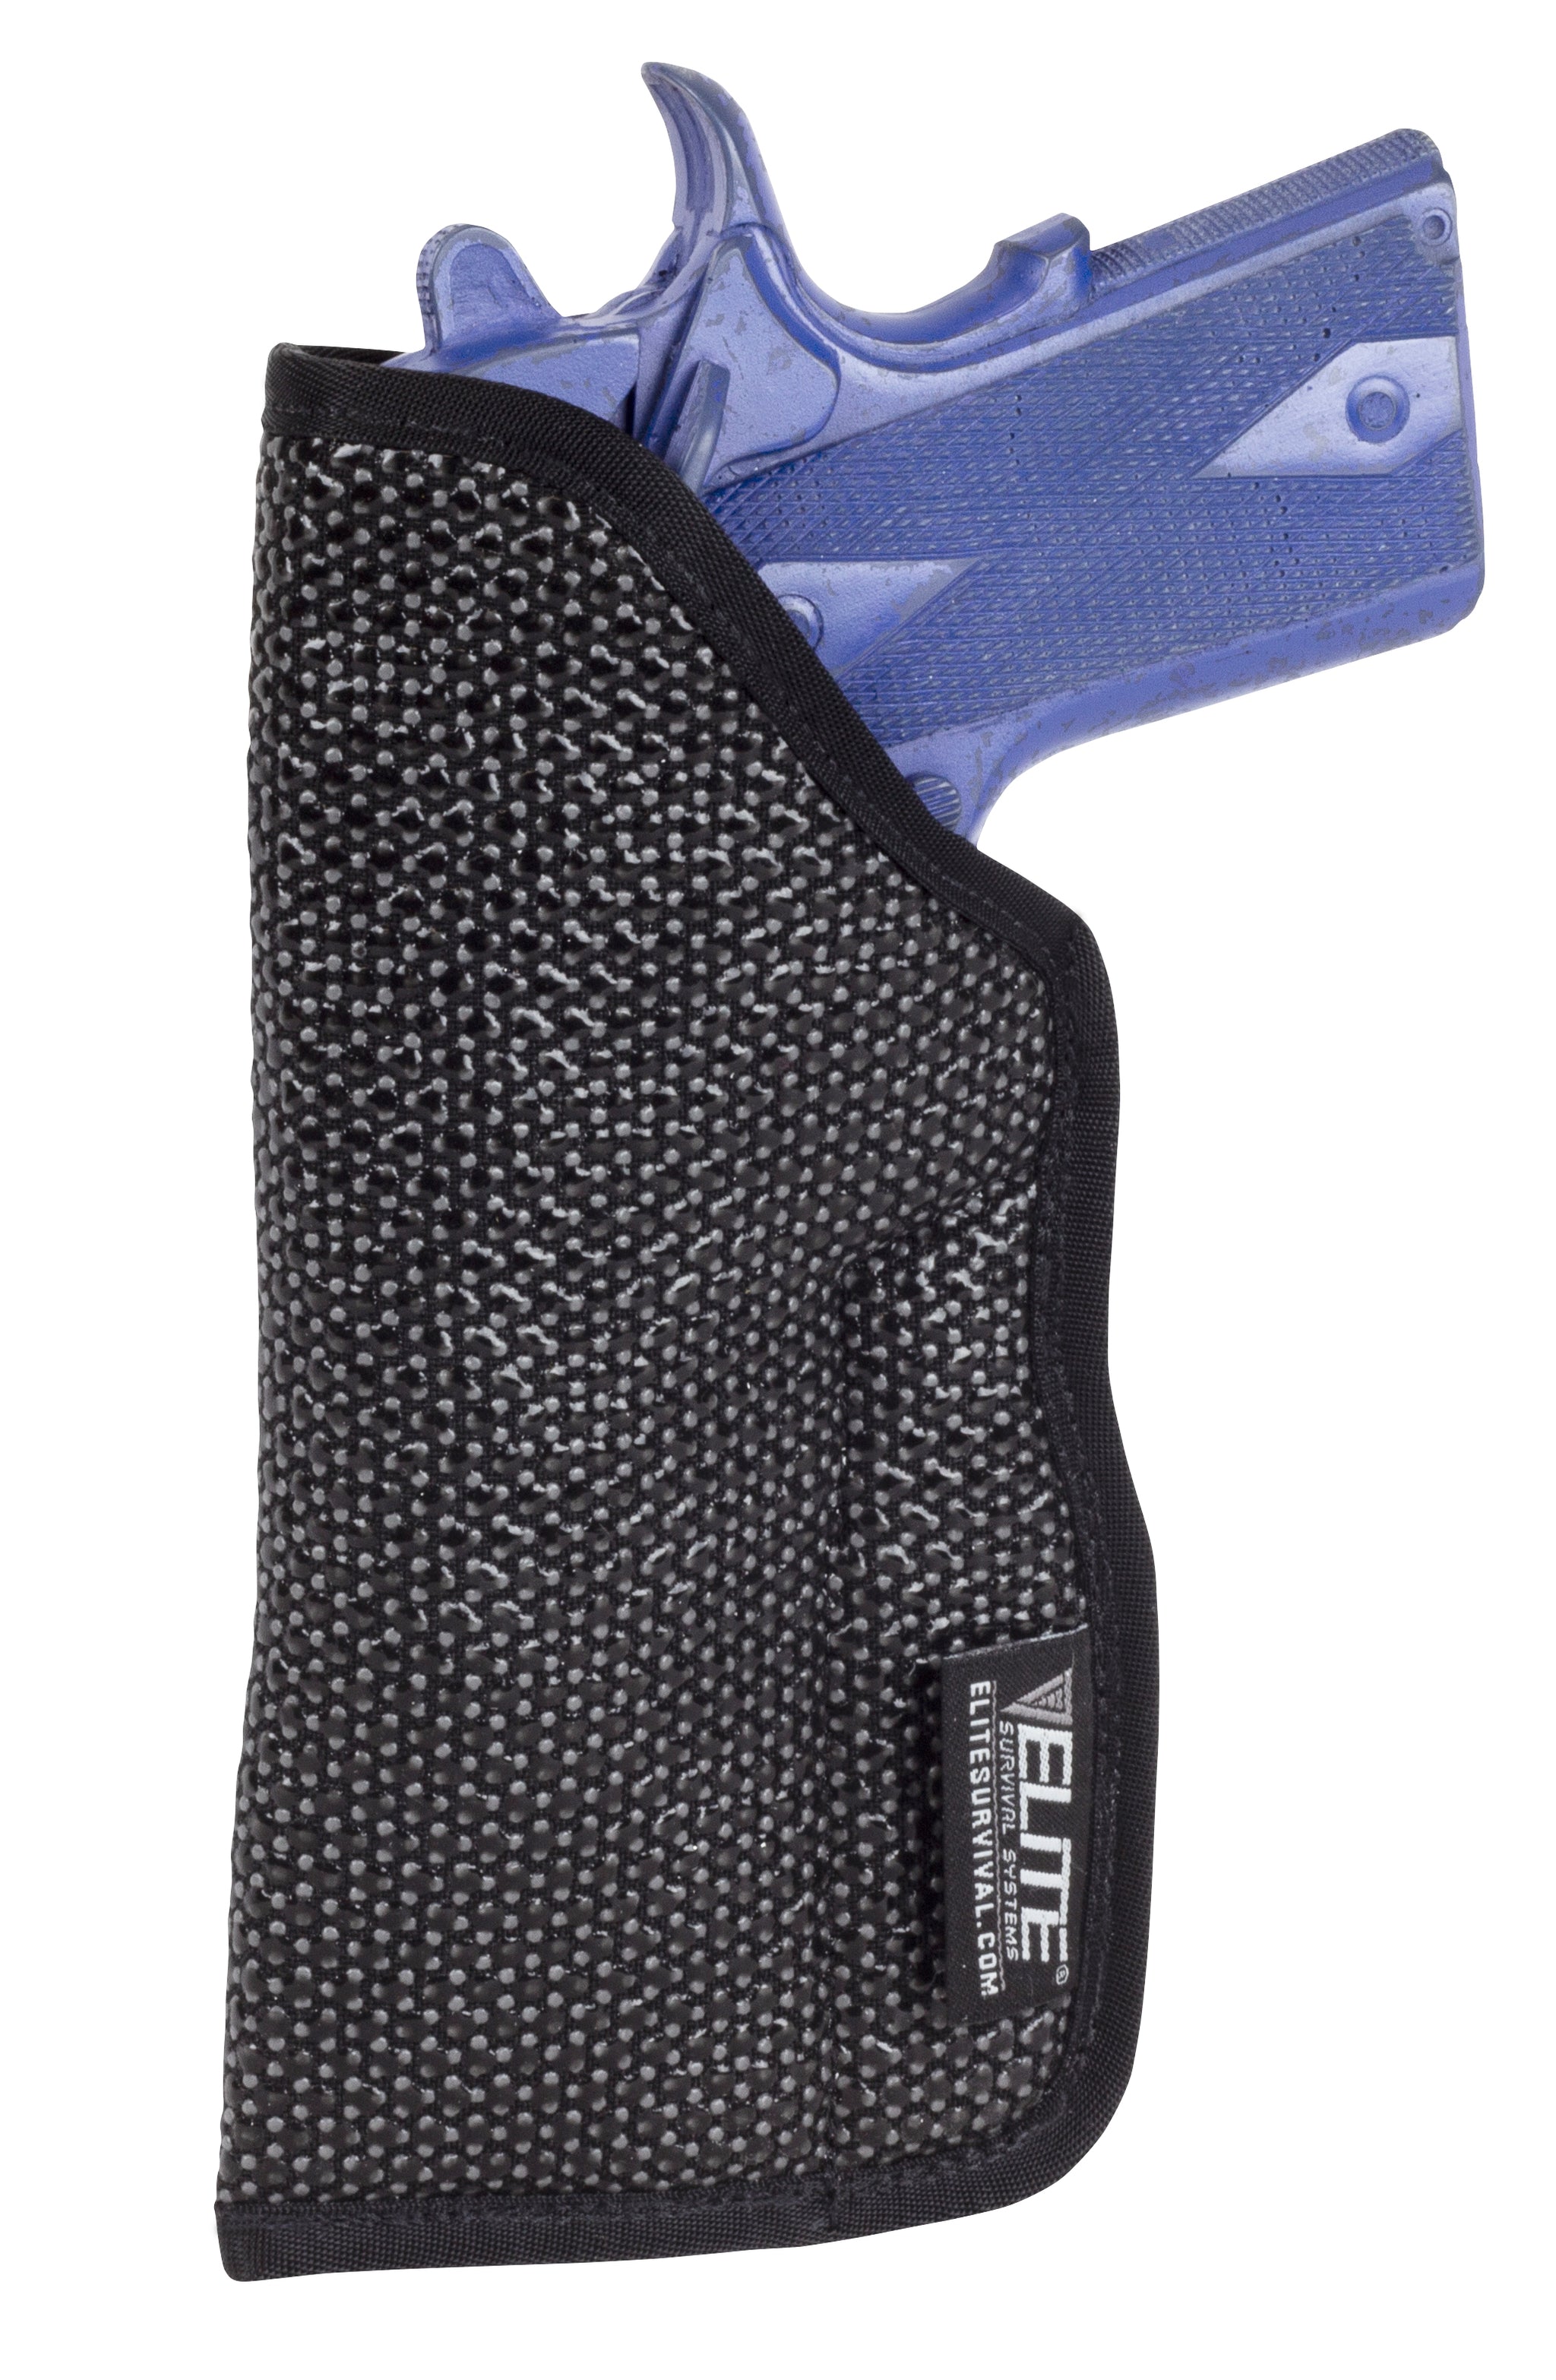 We The People IWB Holster for Glock 17 / 22 / 31 / 47